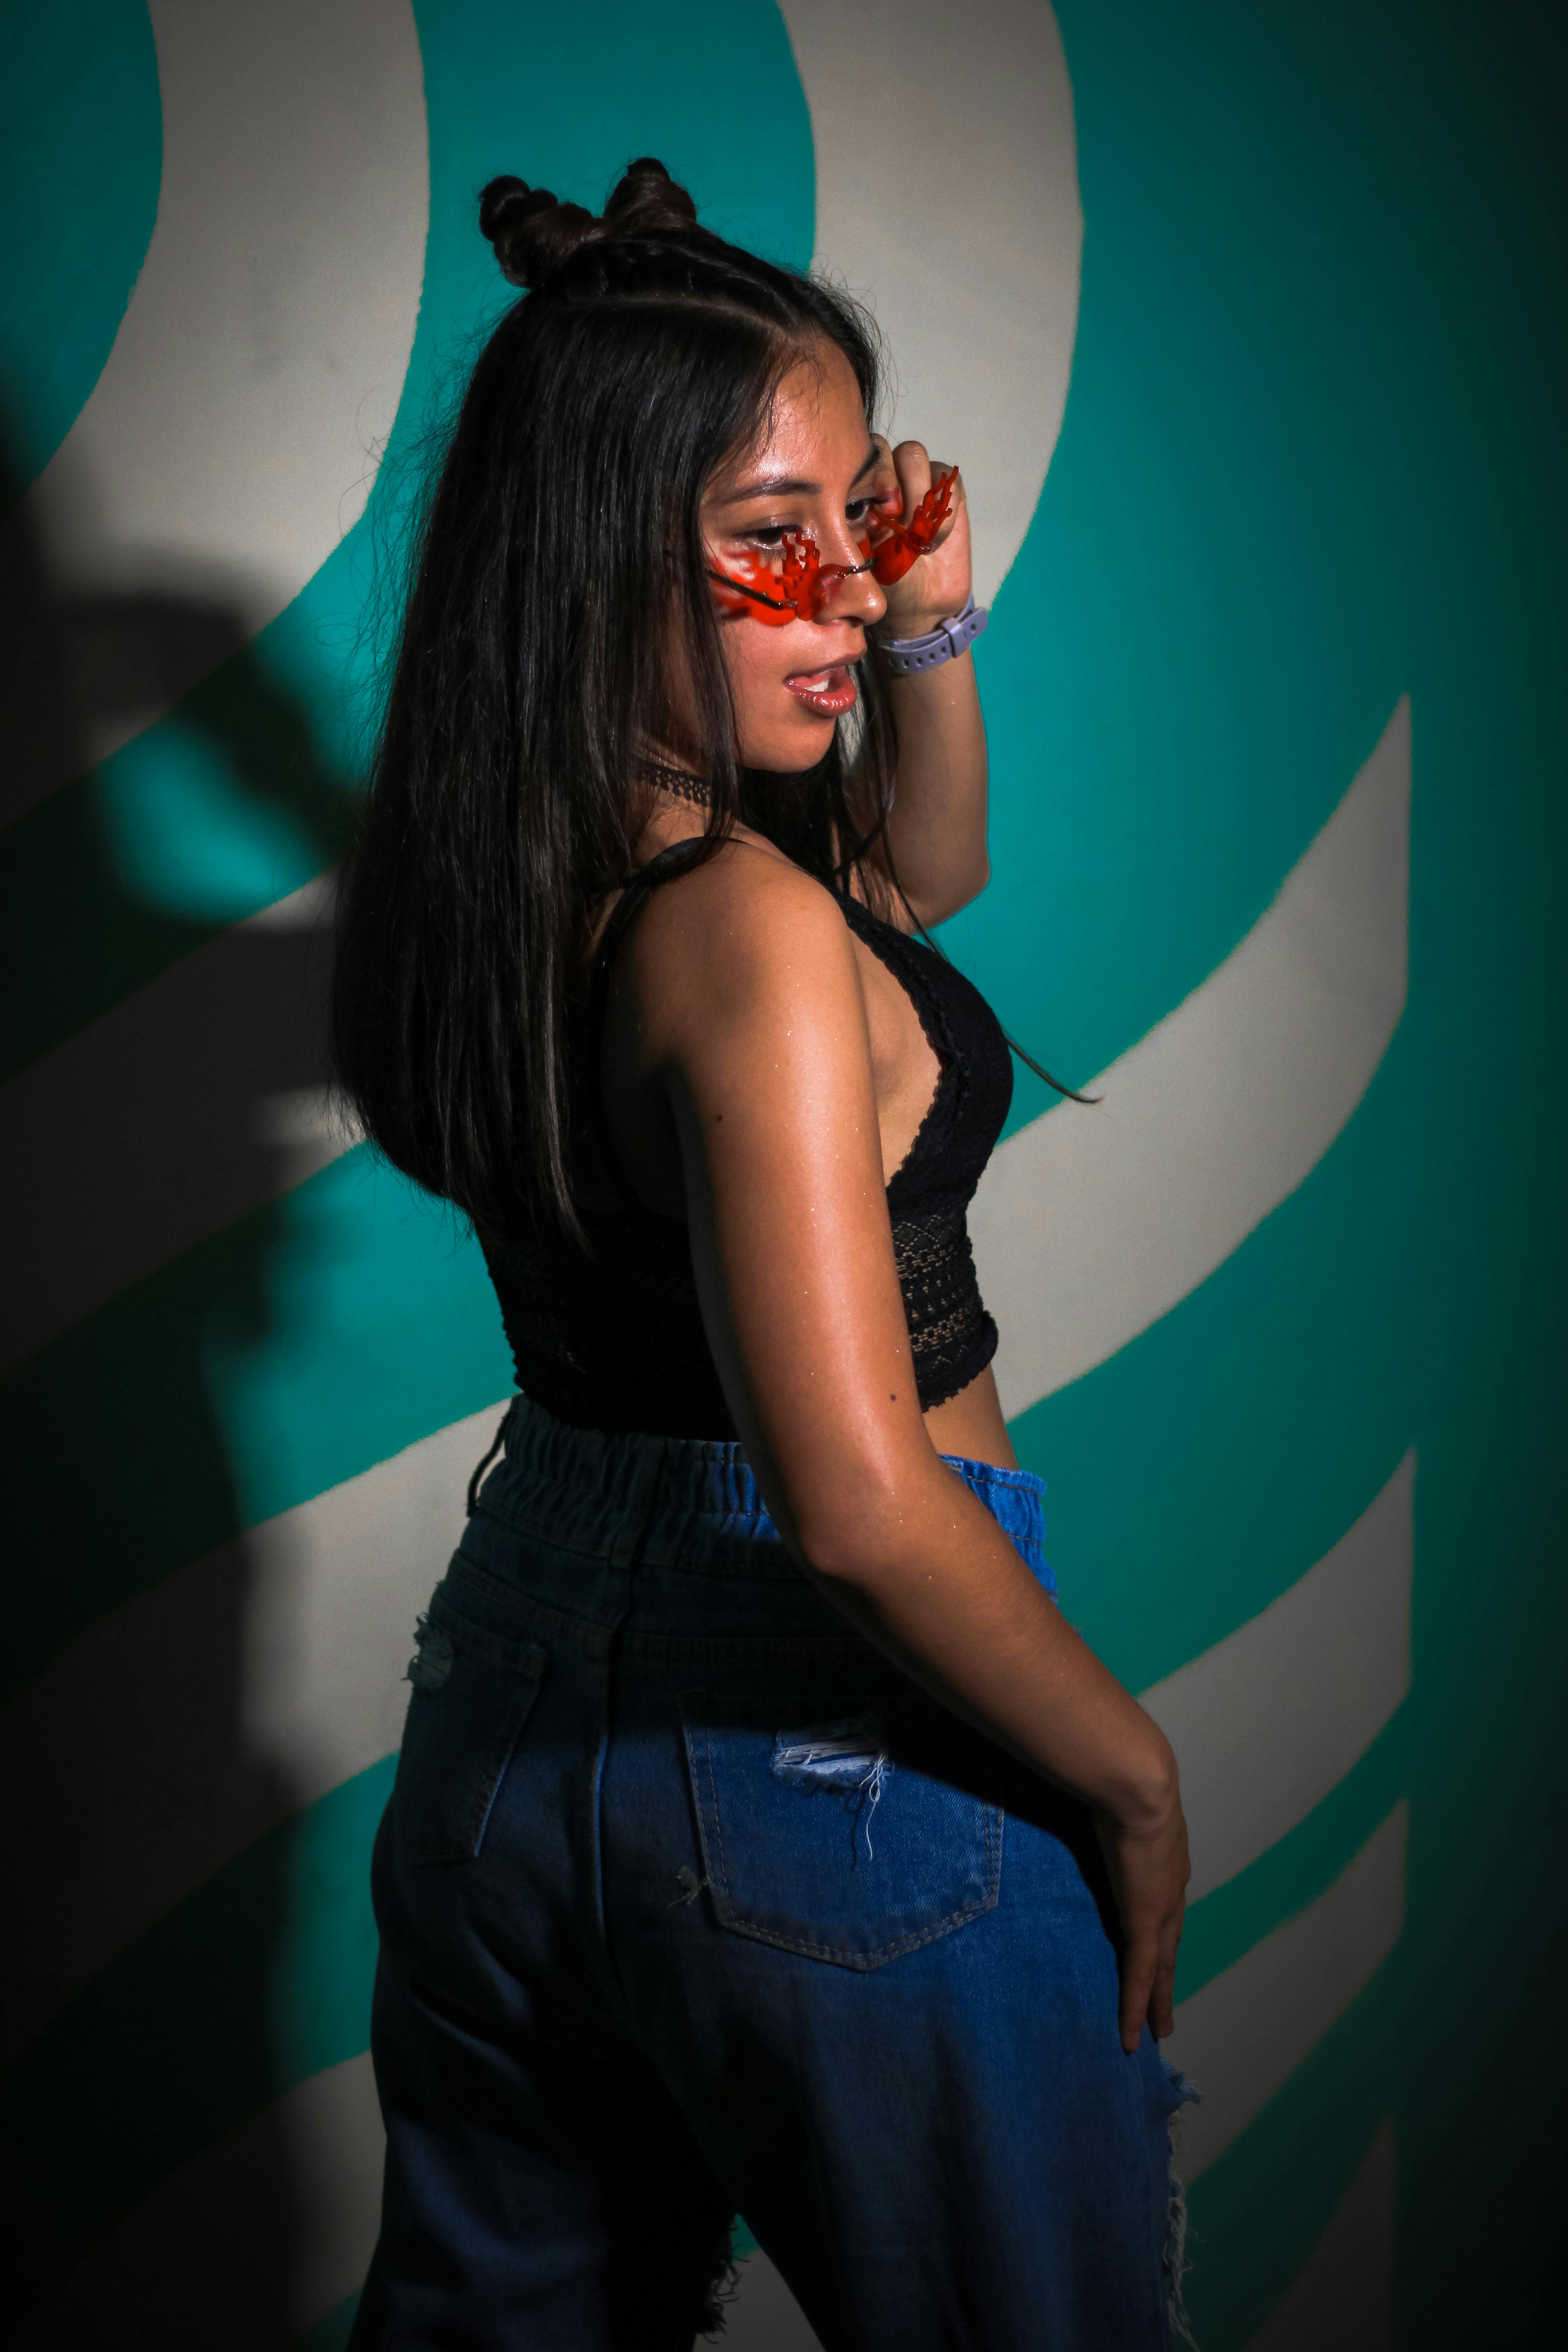 A woman in a crop top and jeans poses for a picture photo – Free Mexico  Image on Unsplash